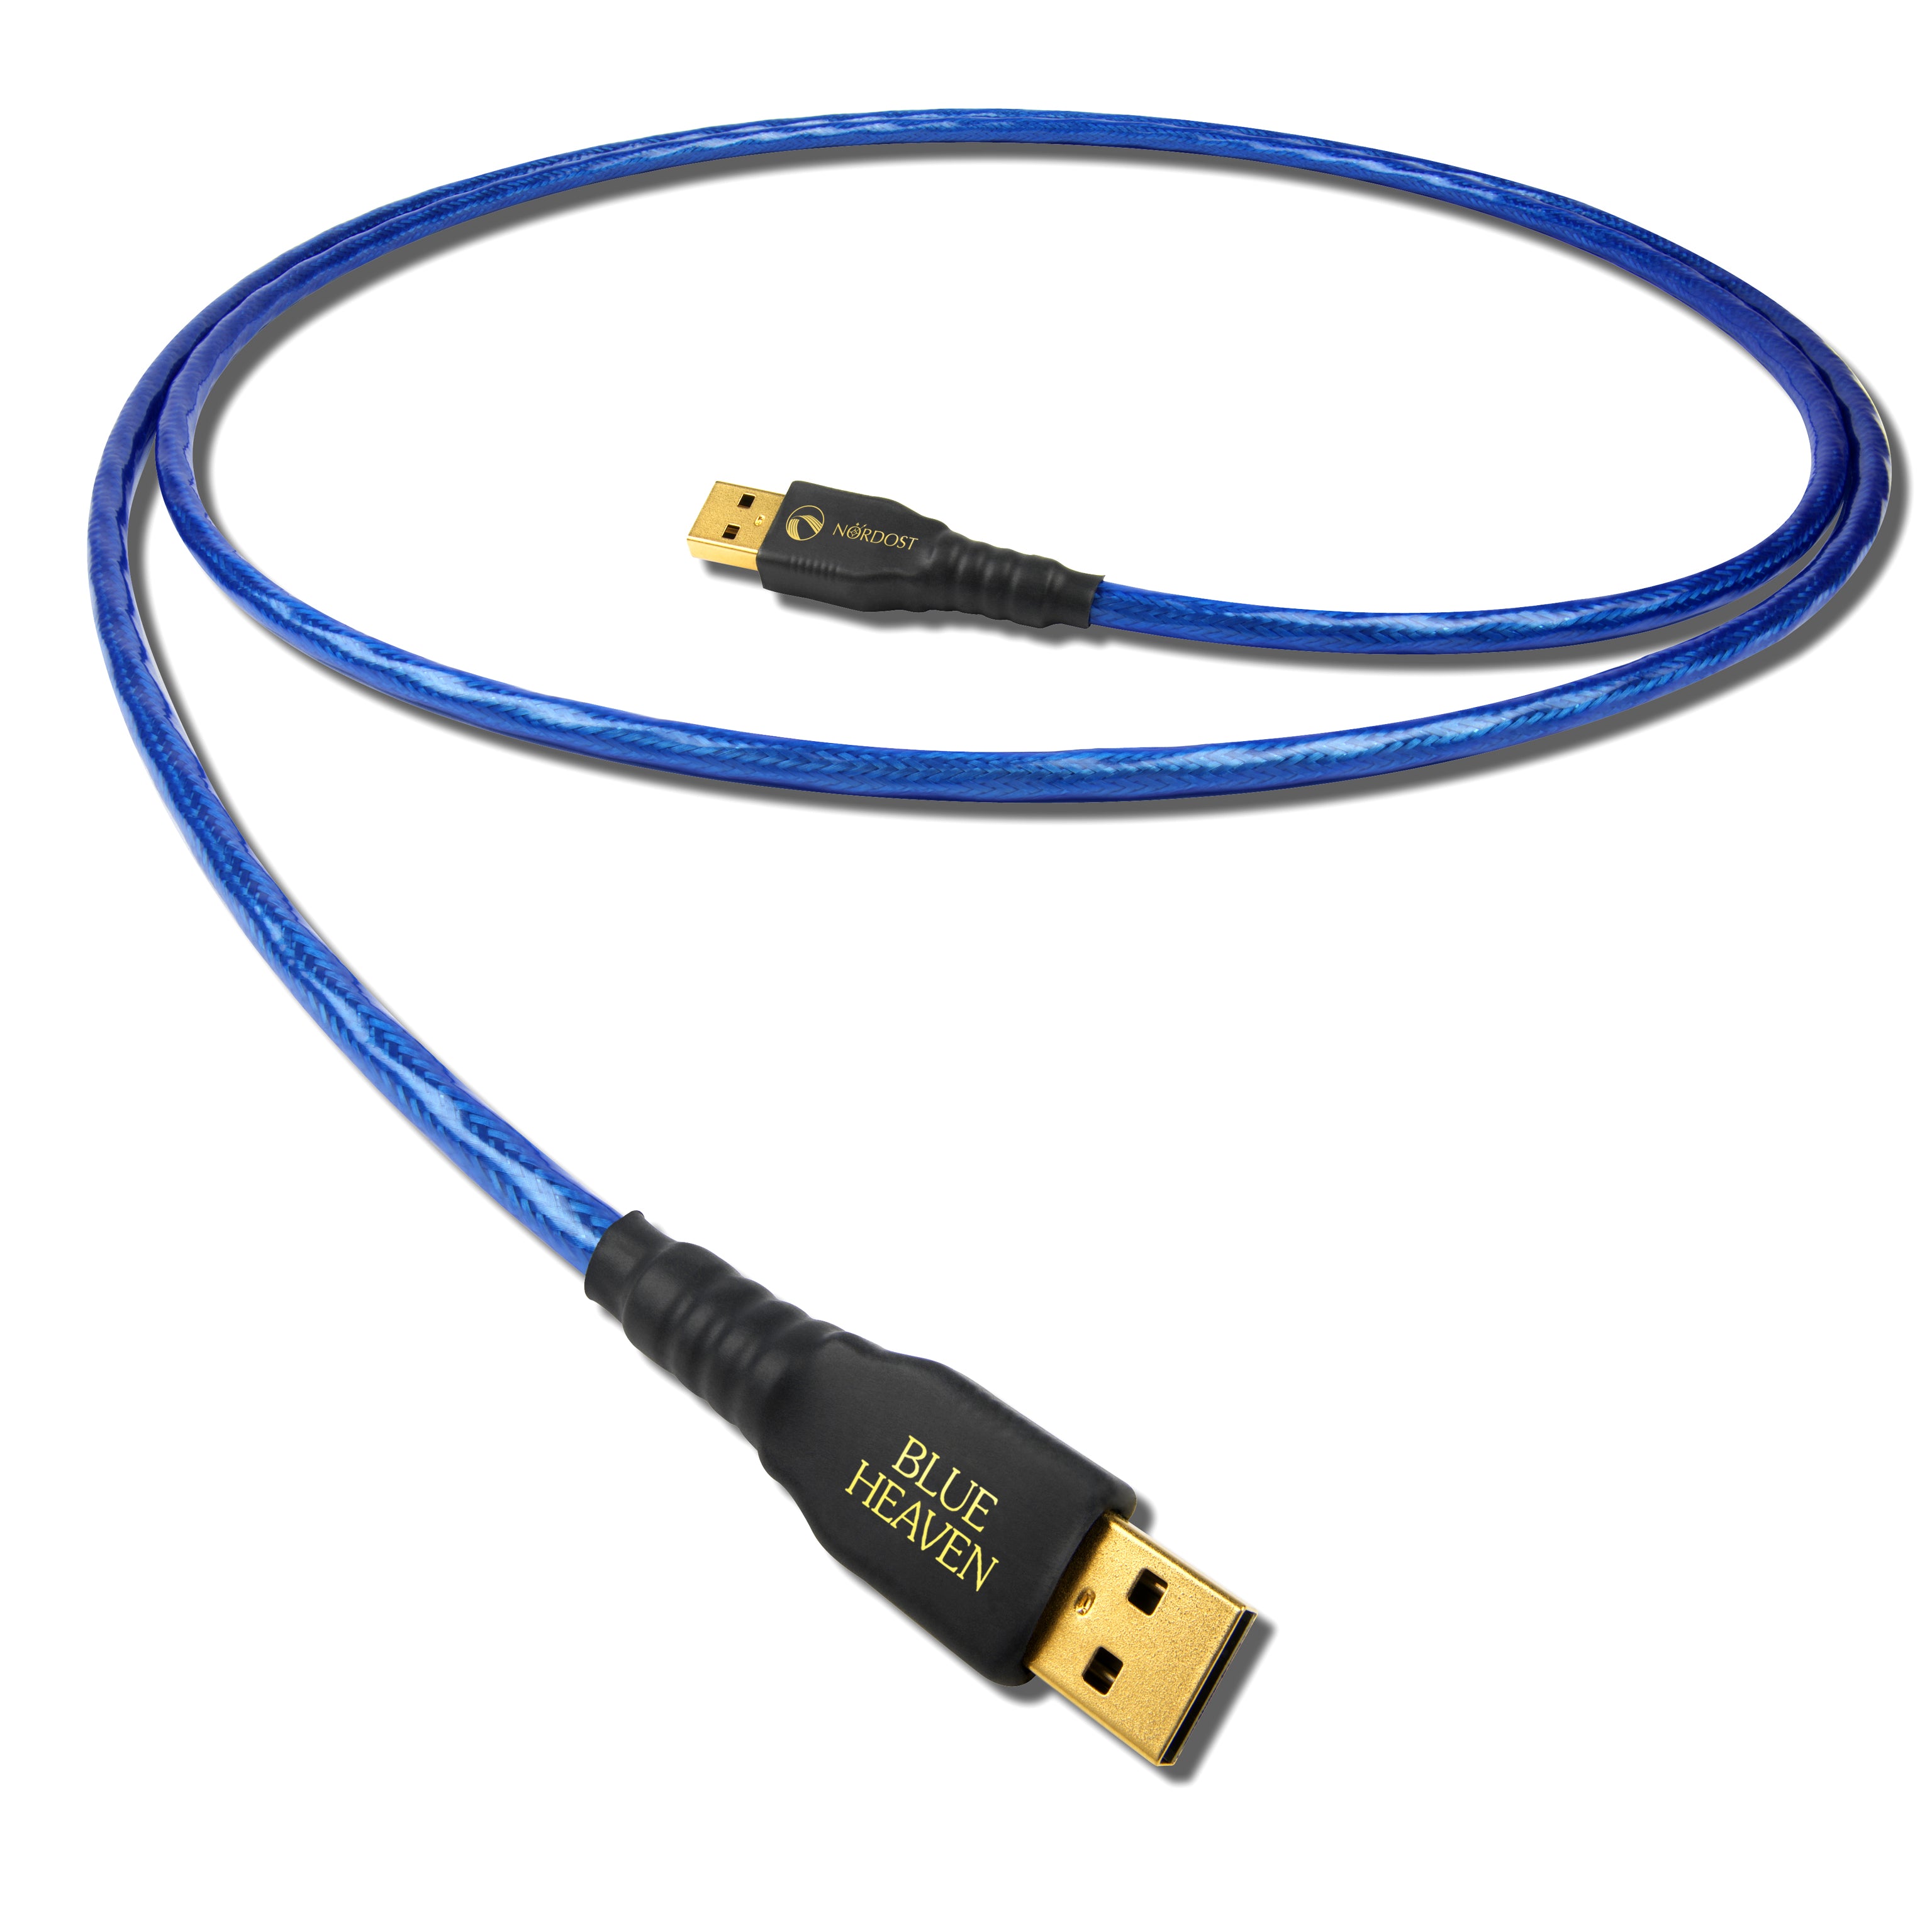 Nordost Leif Blue Heaven USB 2.0 Cable